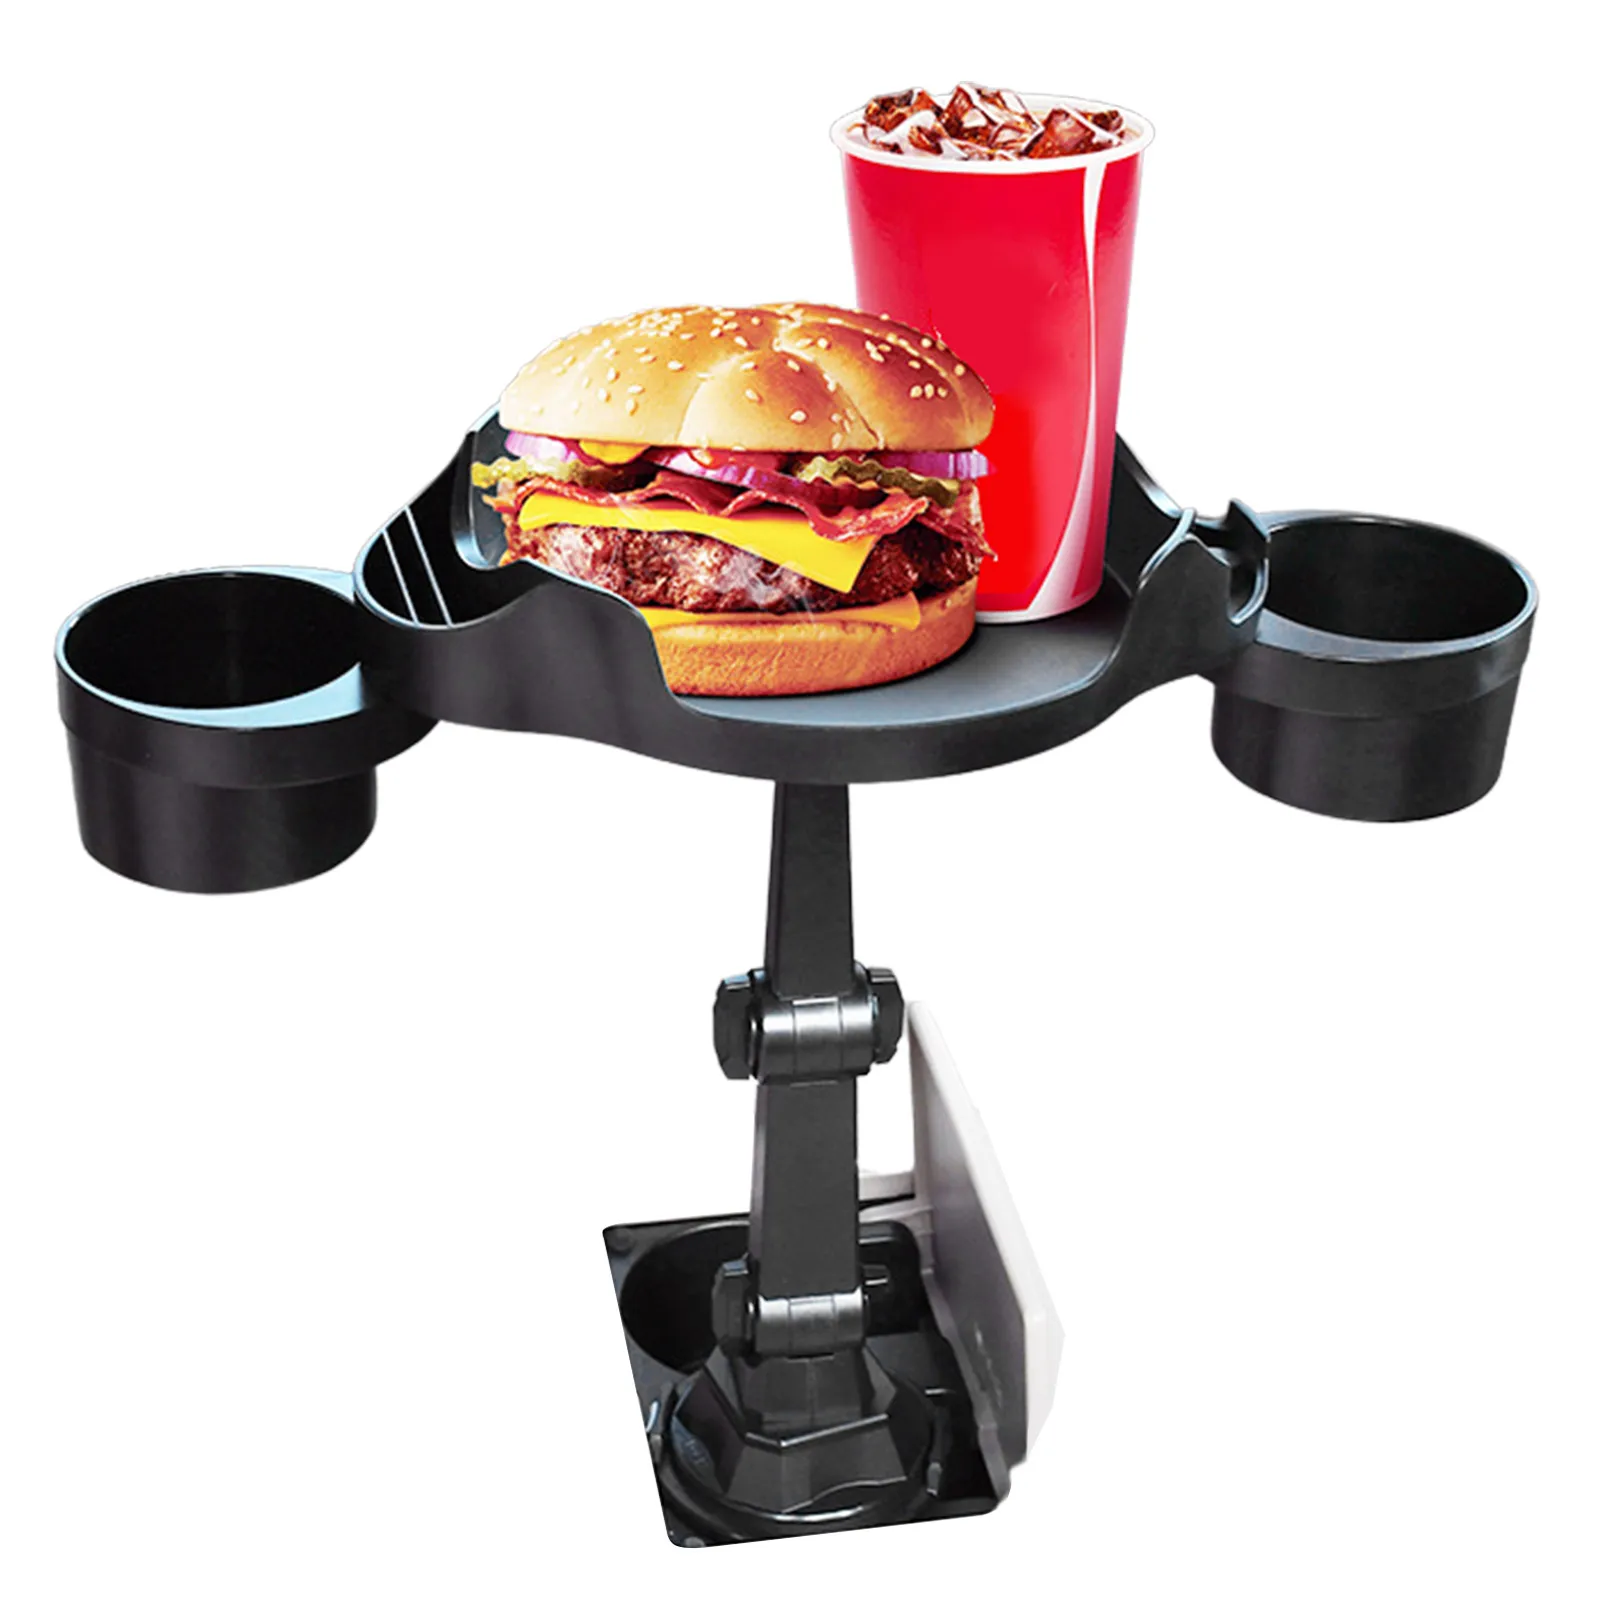 

Car Cup Holder Expander Tray Multifunctional Automotive Cup Tray With 360Rotation Cup Holder Adjustable Base Adapt Cup Bottles